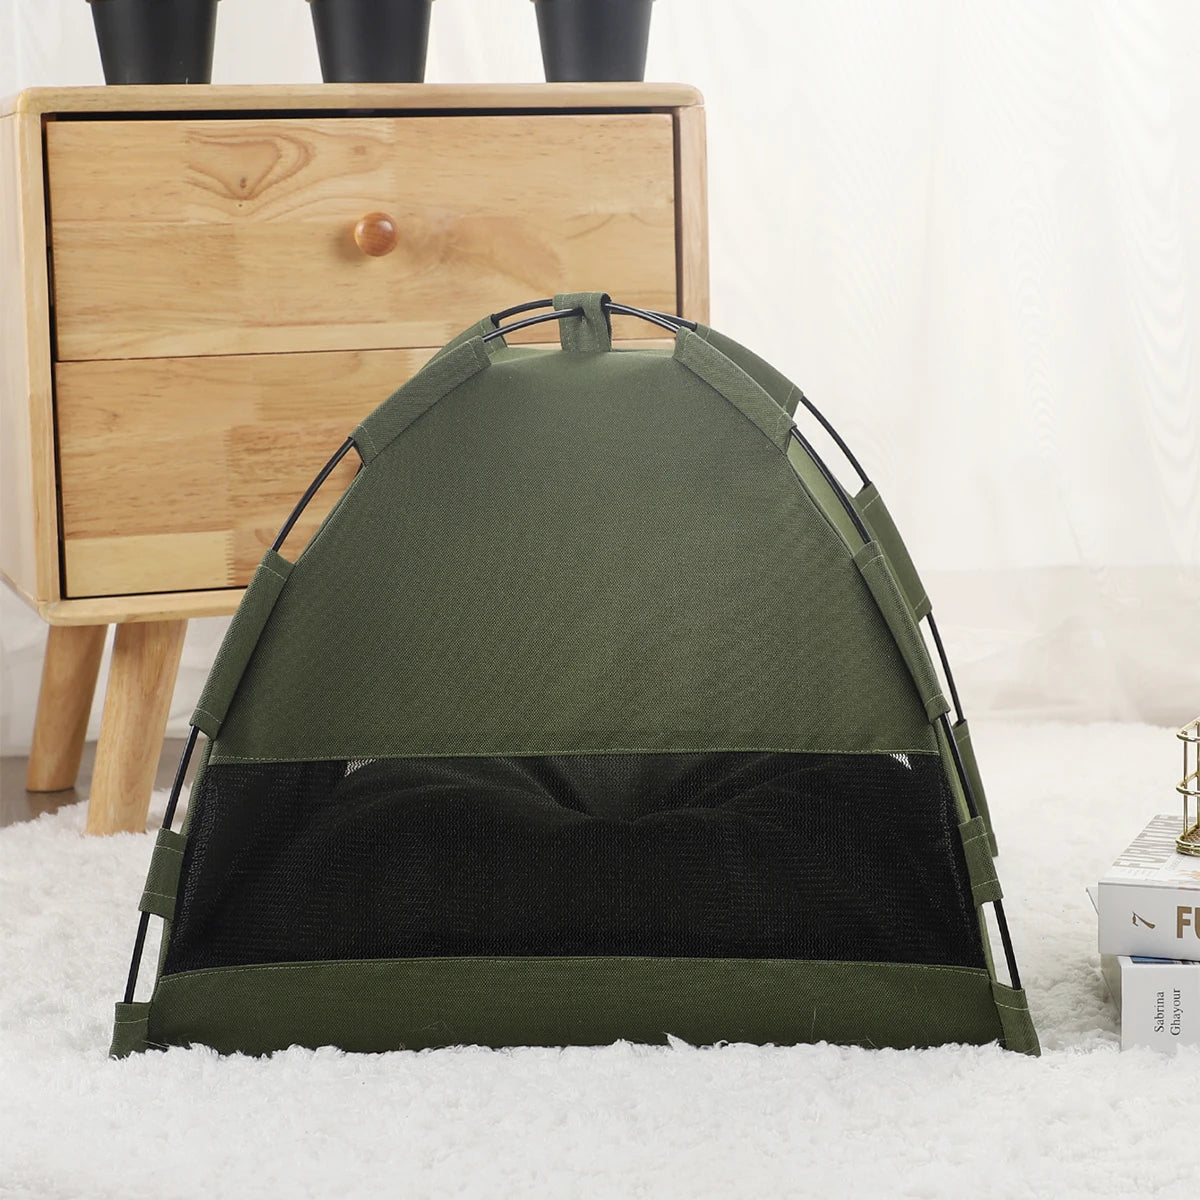 Pet Tent Bed for Cats